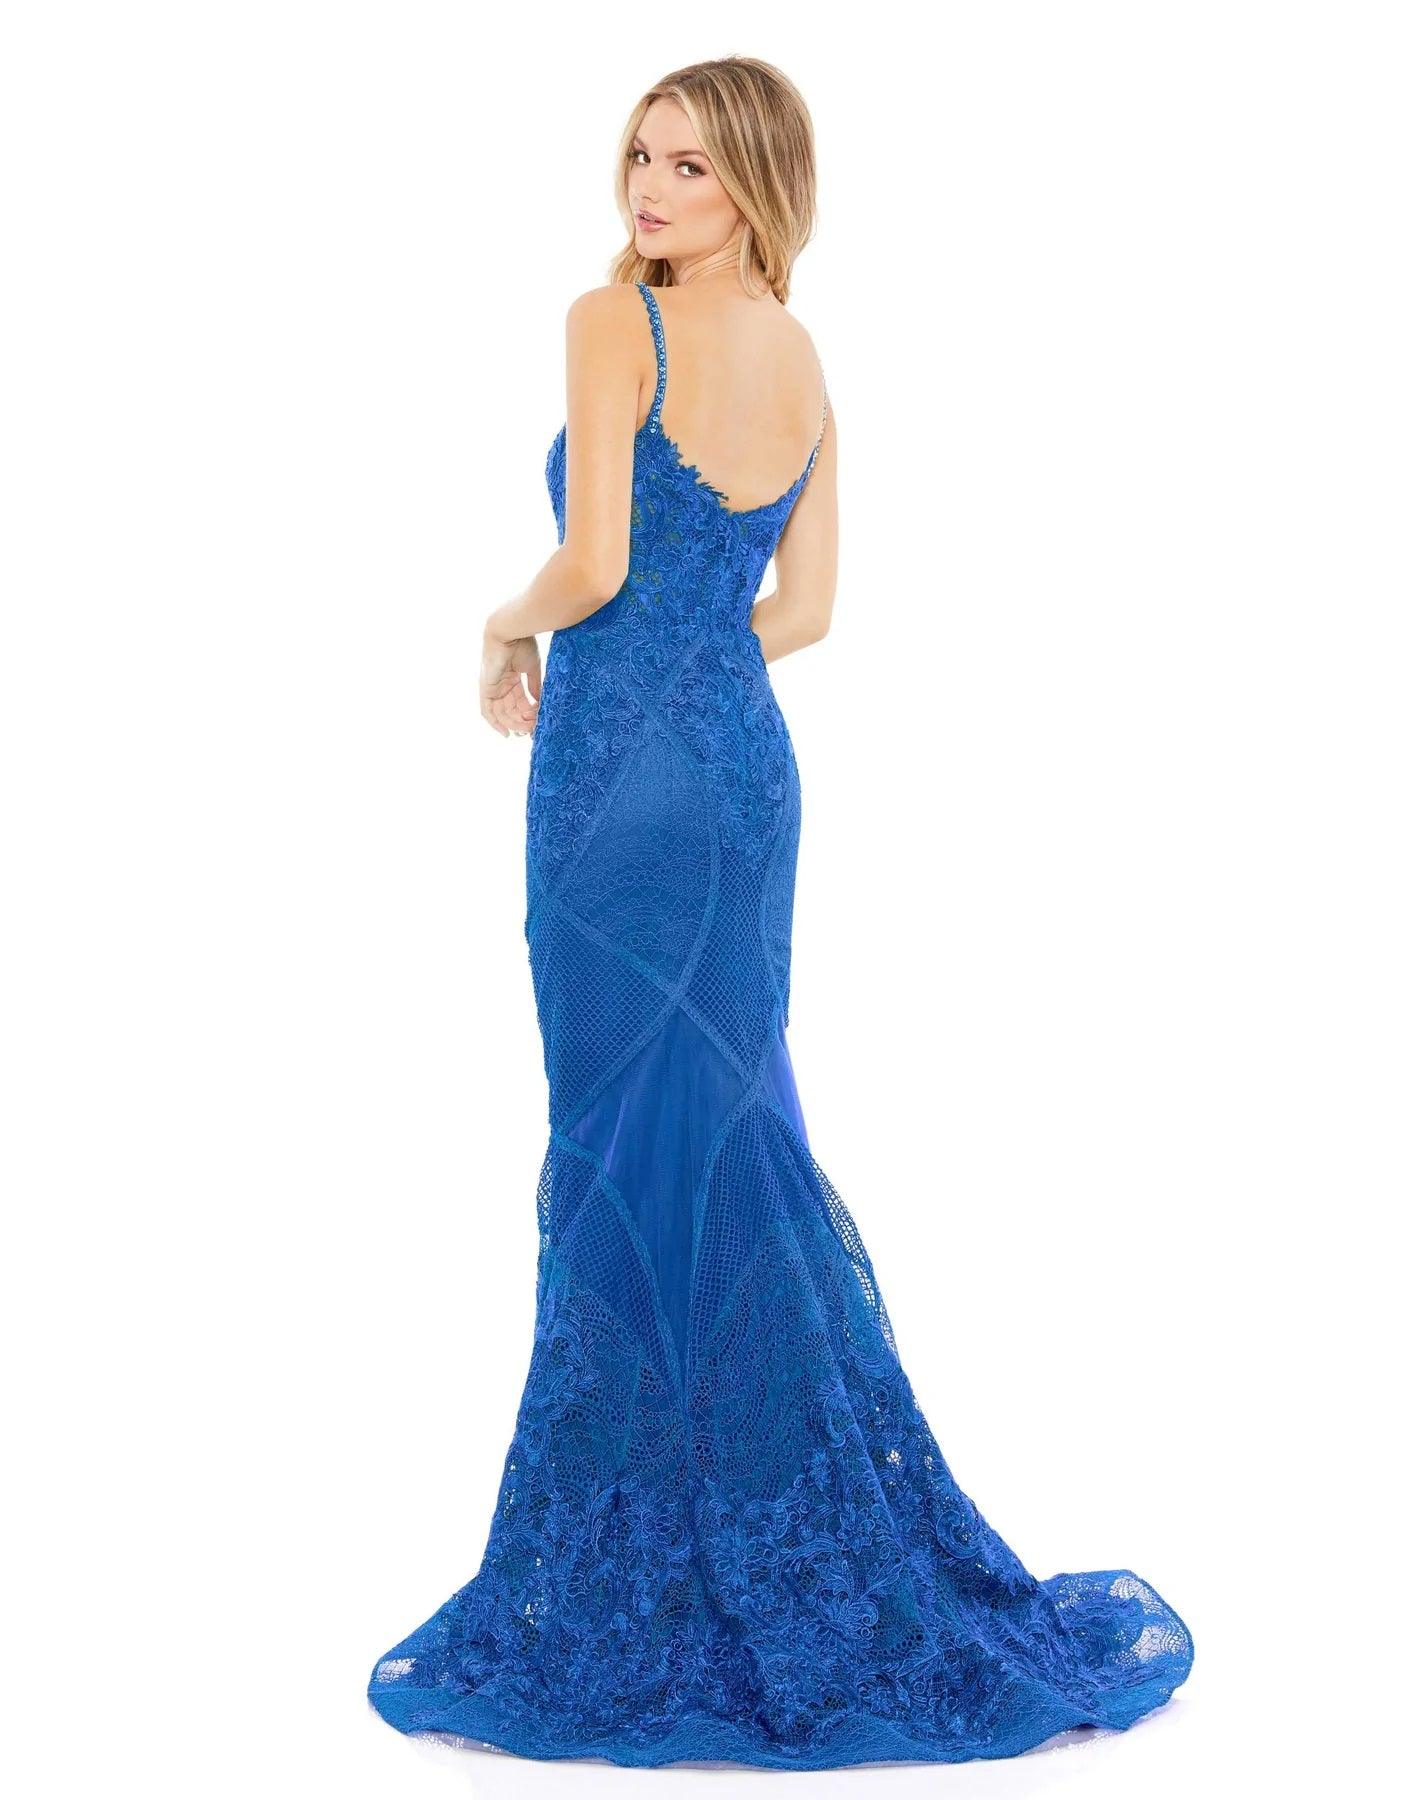 Mac Duggal Prom Long Mermaid Lace Gown 79082R - The Dress Outlet